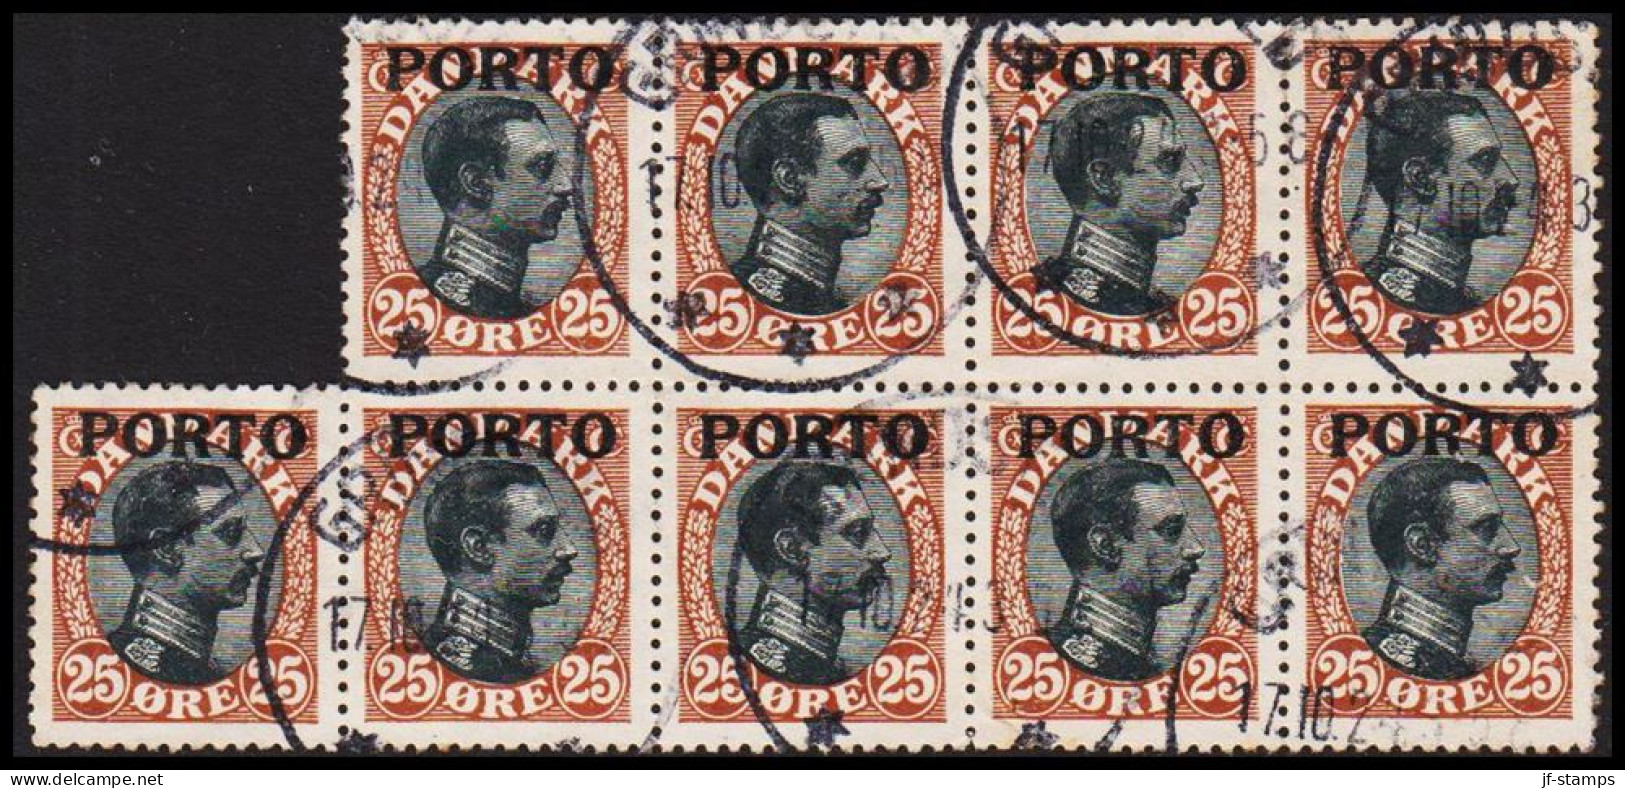 1923. DANMARK. Postage Due. Porto. Chr. X. 25 Øre Brown/black In 9block Cancelled GRINDSTED 17... (Michel P6) - JF545126 - Postage Due